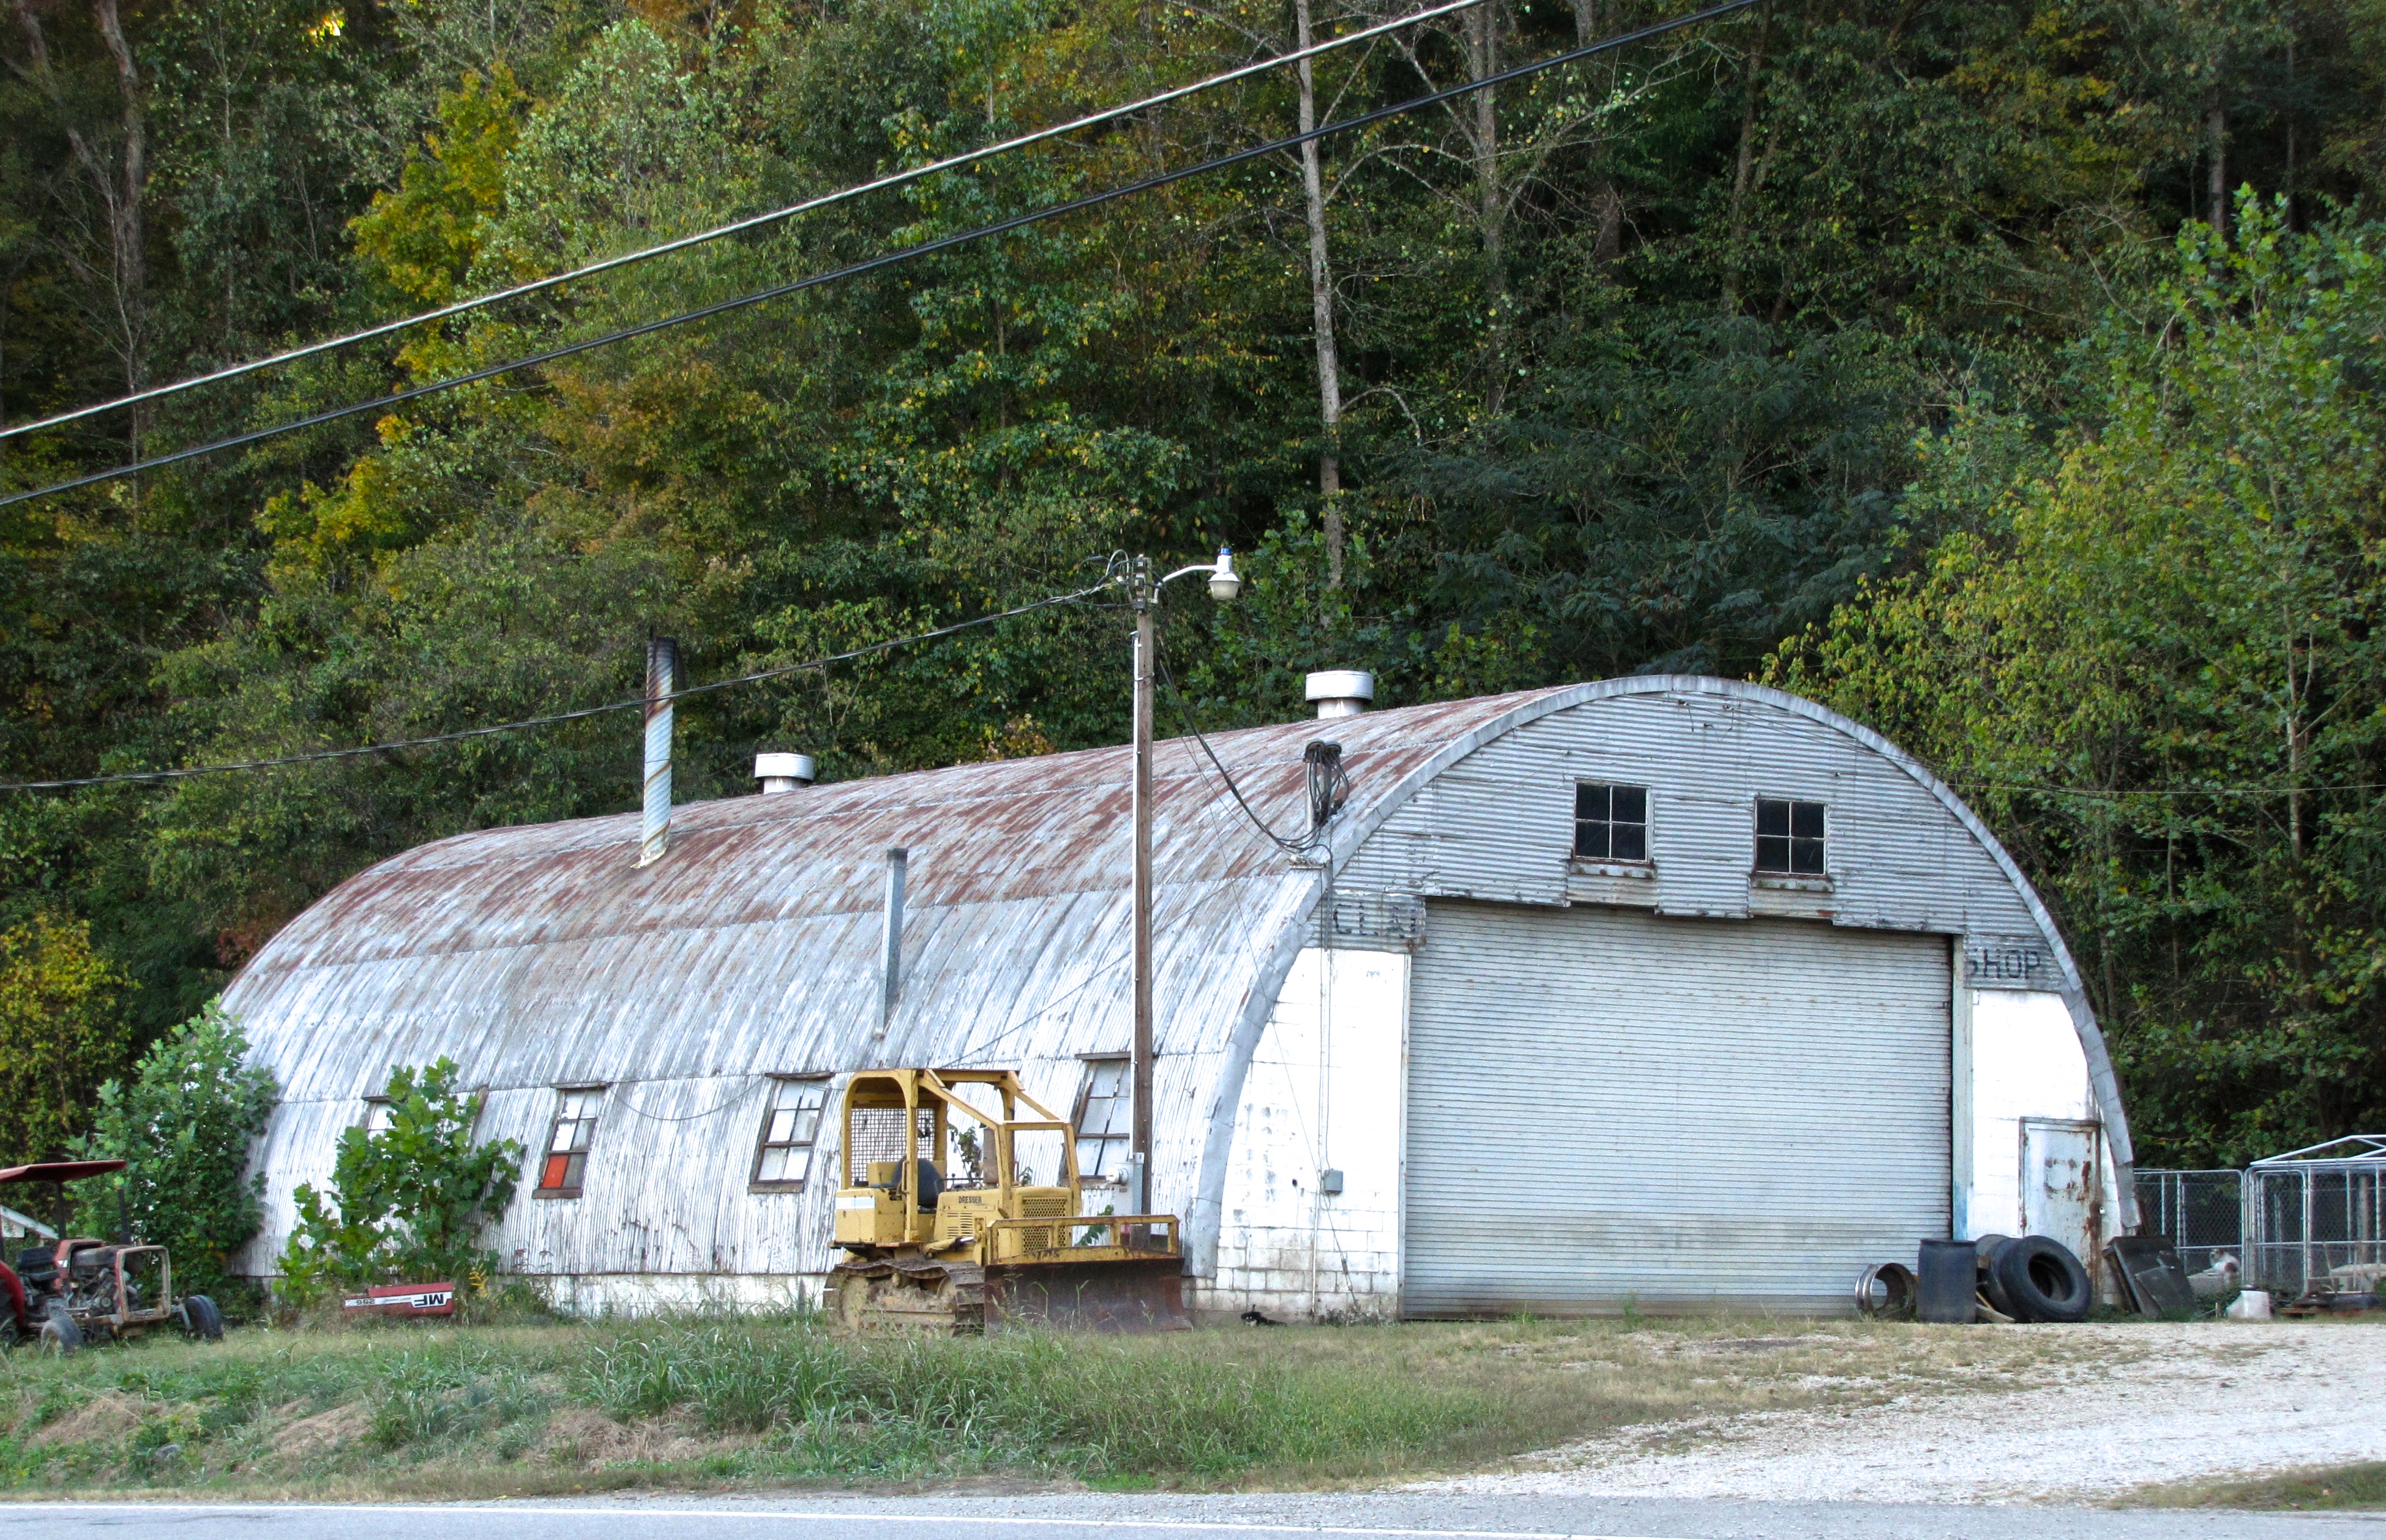 quonset hut in Staten Island, NY